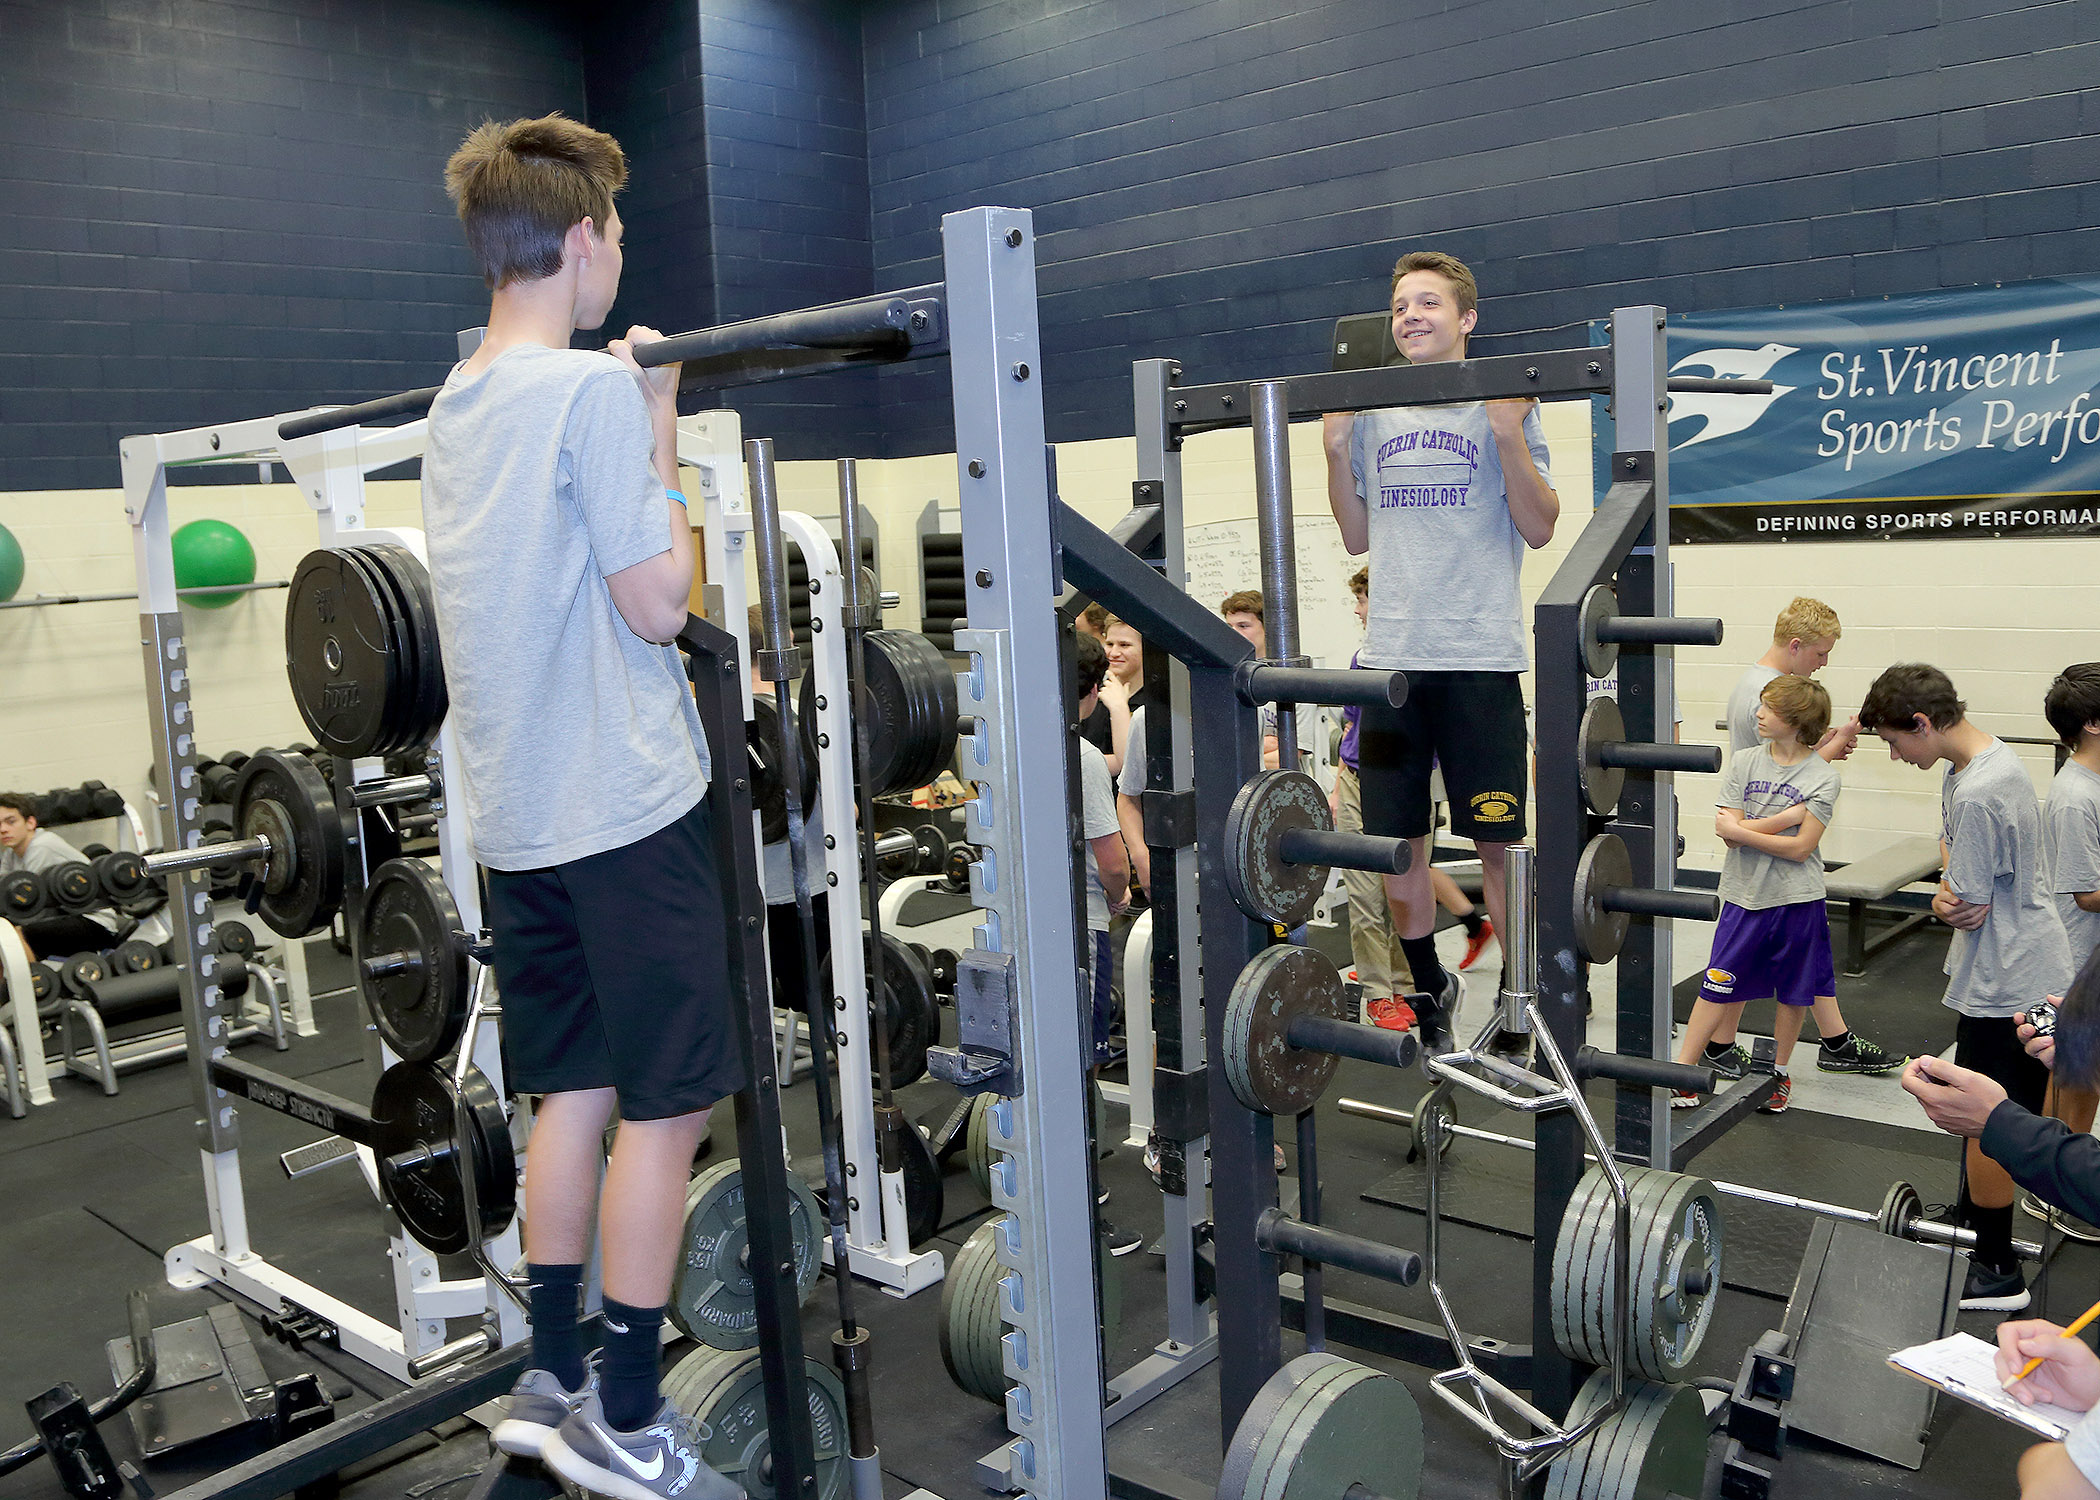 Why do we have a weight room?